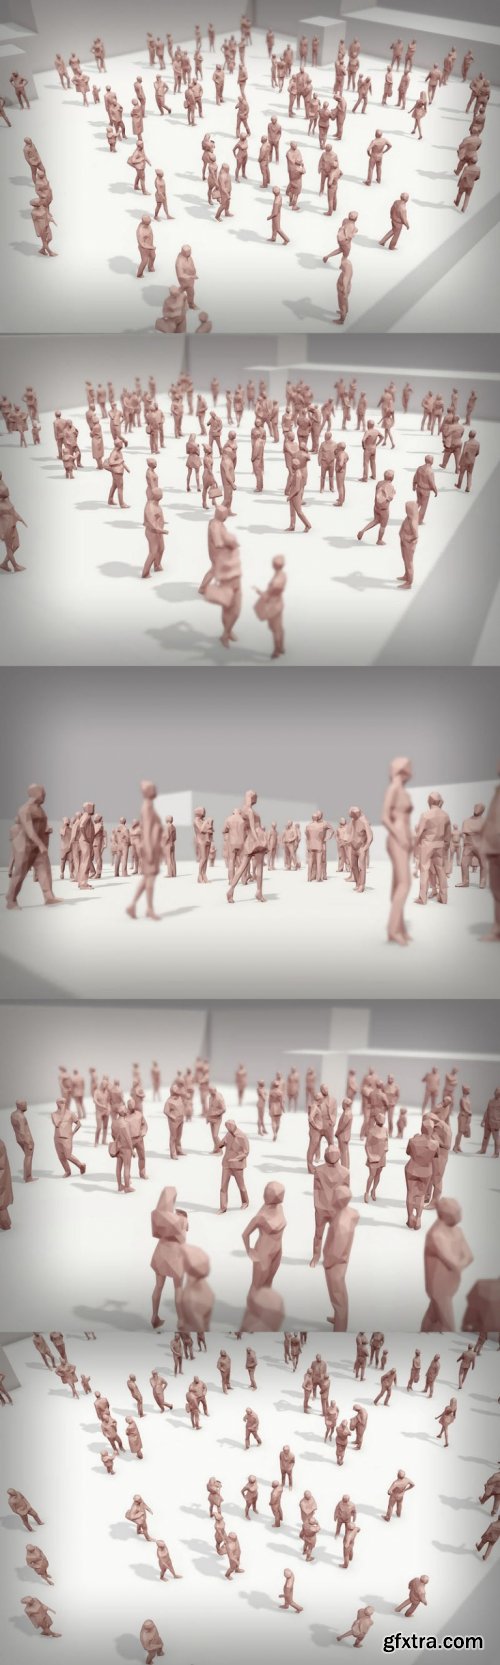 Lowpoly People Crowd – Low-poly 3D model